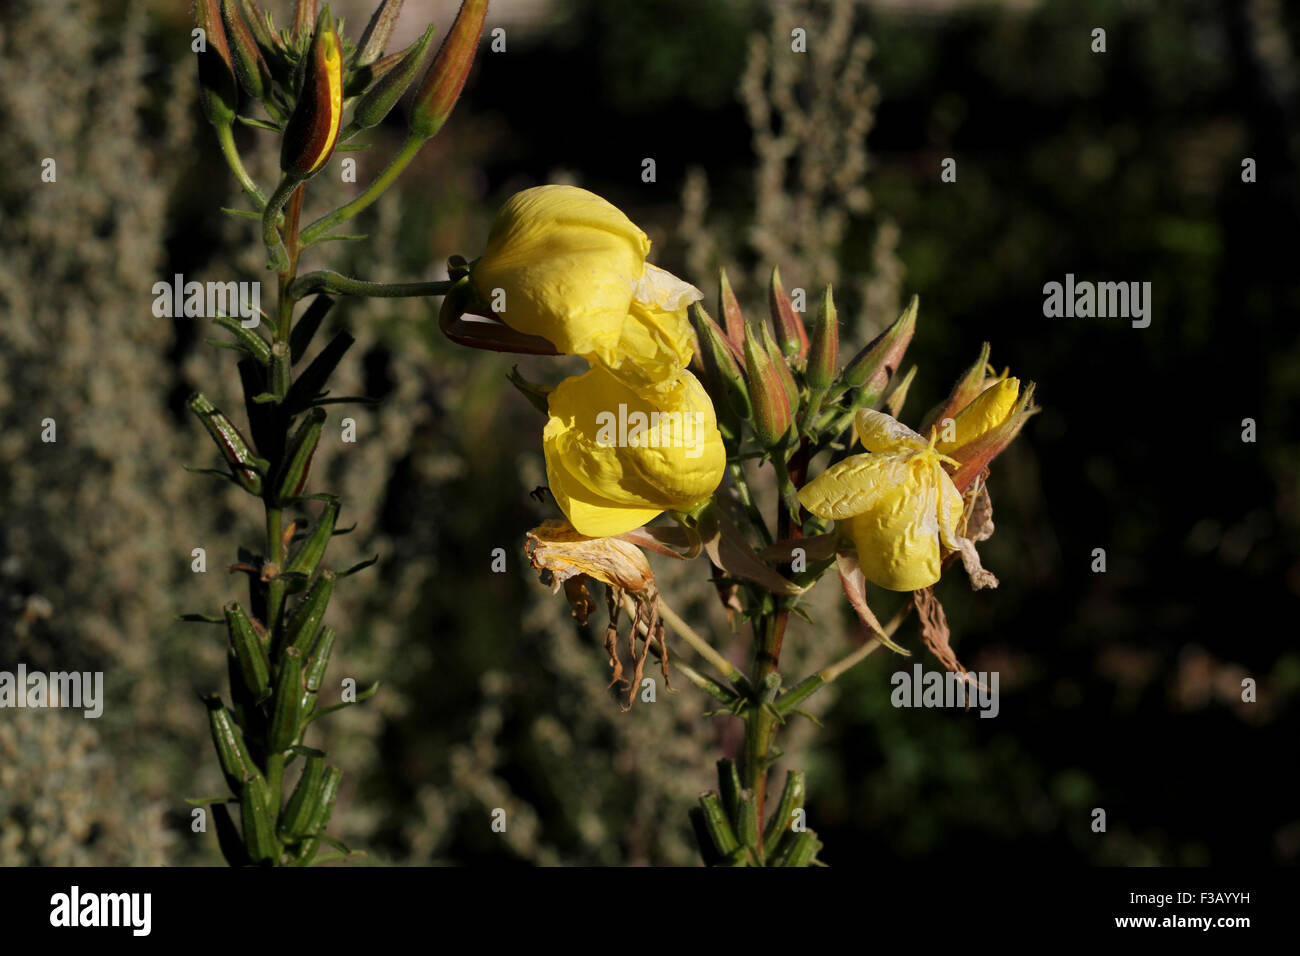 Common evening-primrose, King's  cure-all, (Oenothera biennis) in the National Park Skjoldungernes Land, Lejre, Zealand, Denmark Stock Photo